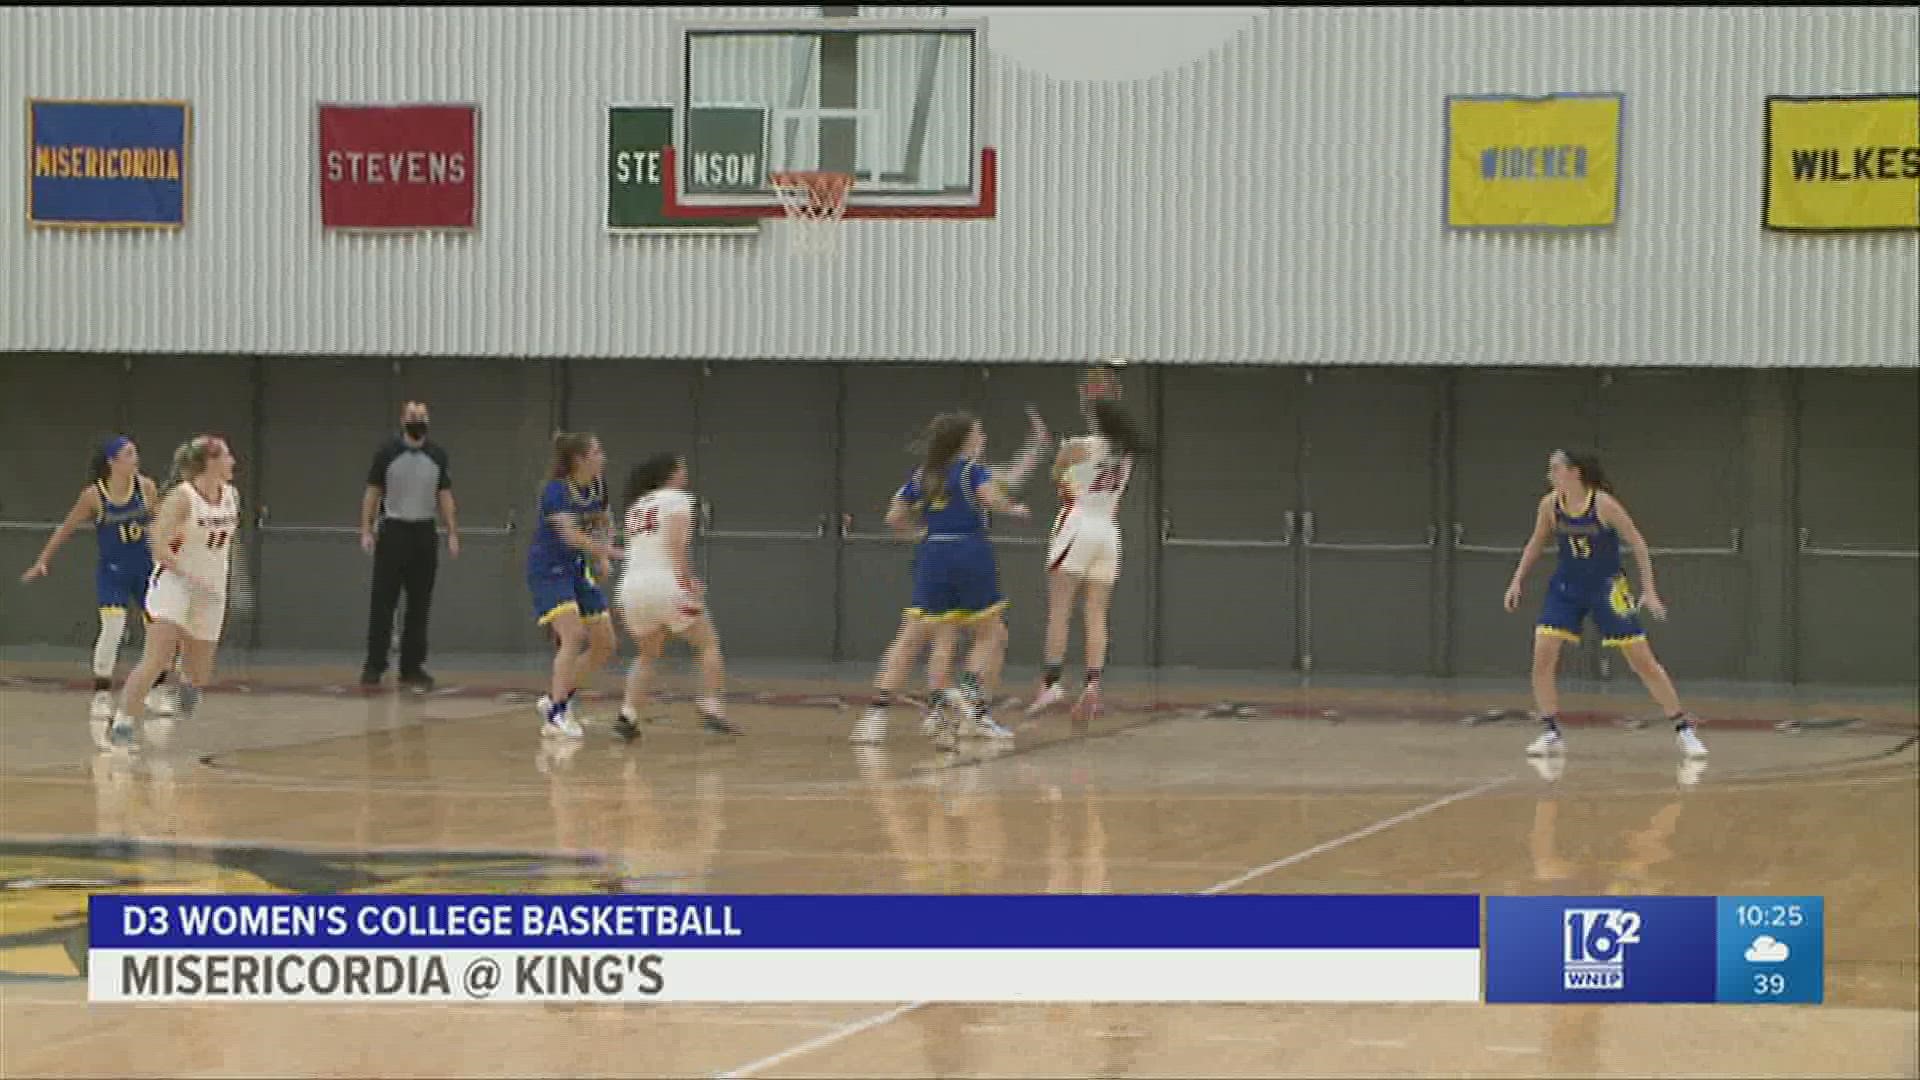 King's pull away from Misericordia 79-61 in D3 Women's College Basketball.